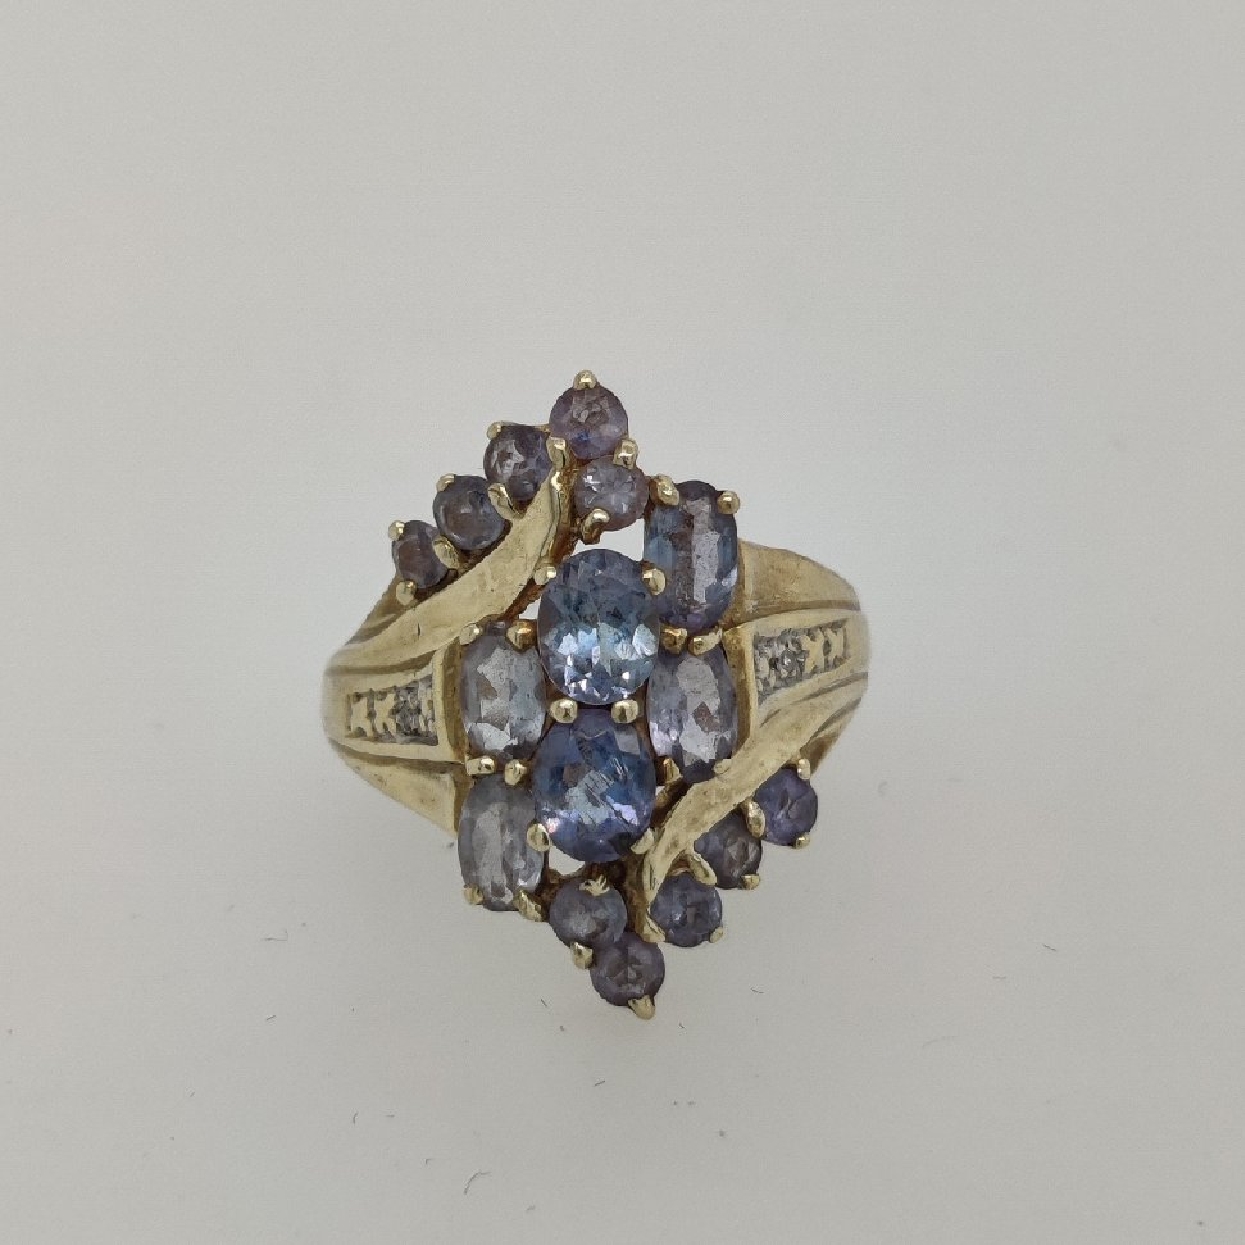 10K Yellow Gold Tapered Shank Ring with Cluster of Blue Stones Size 6.75